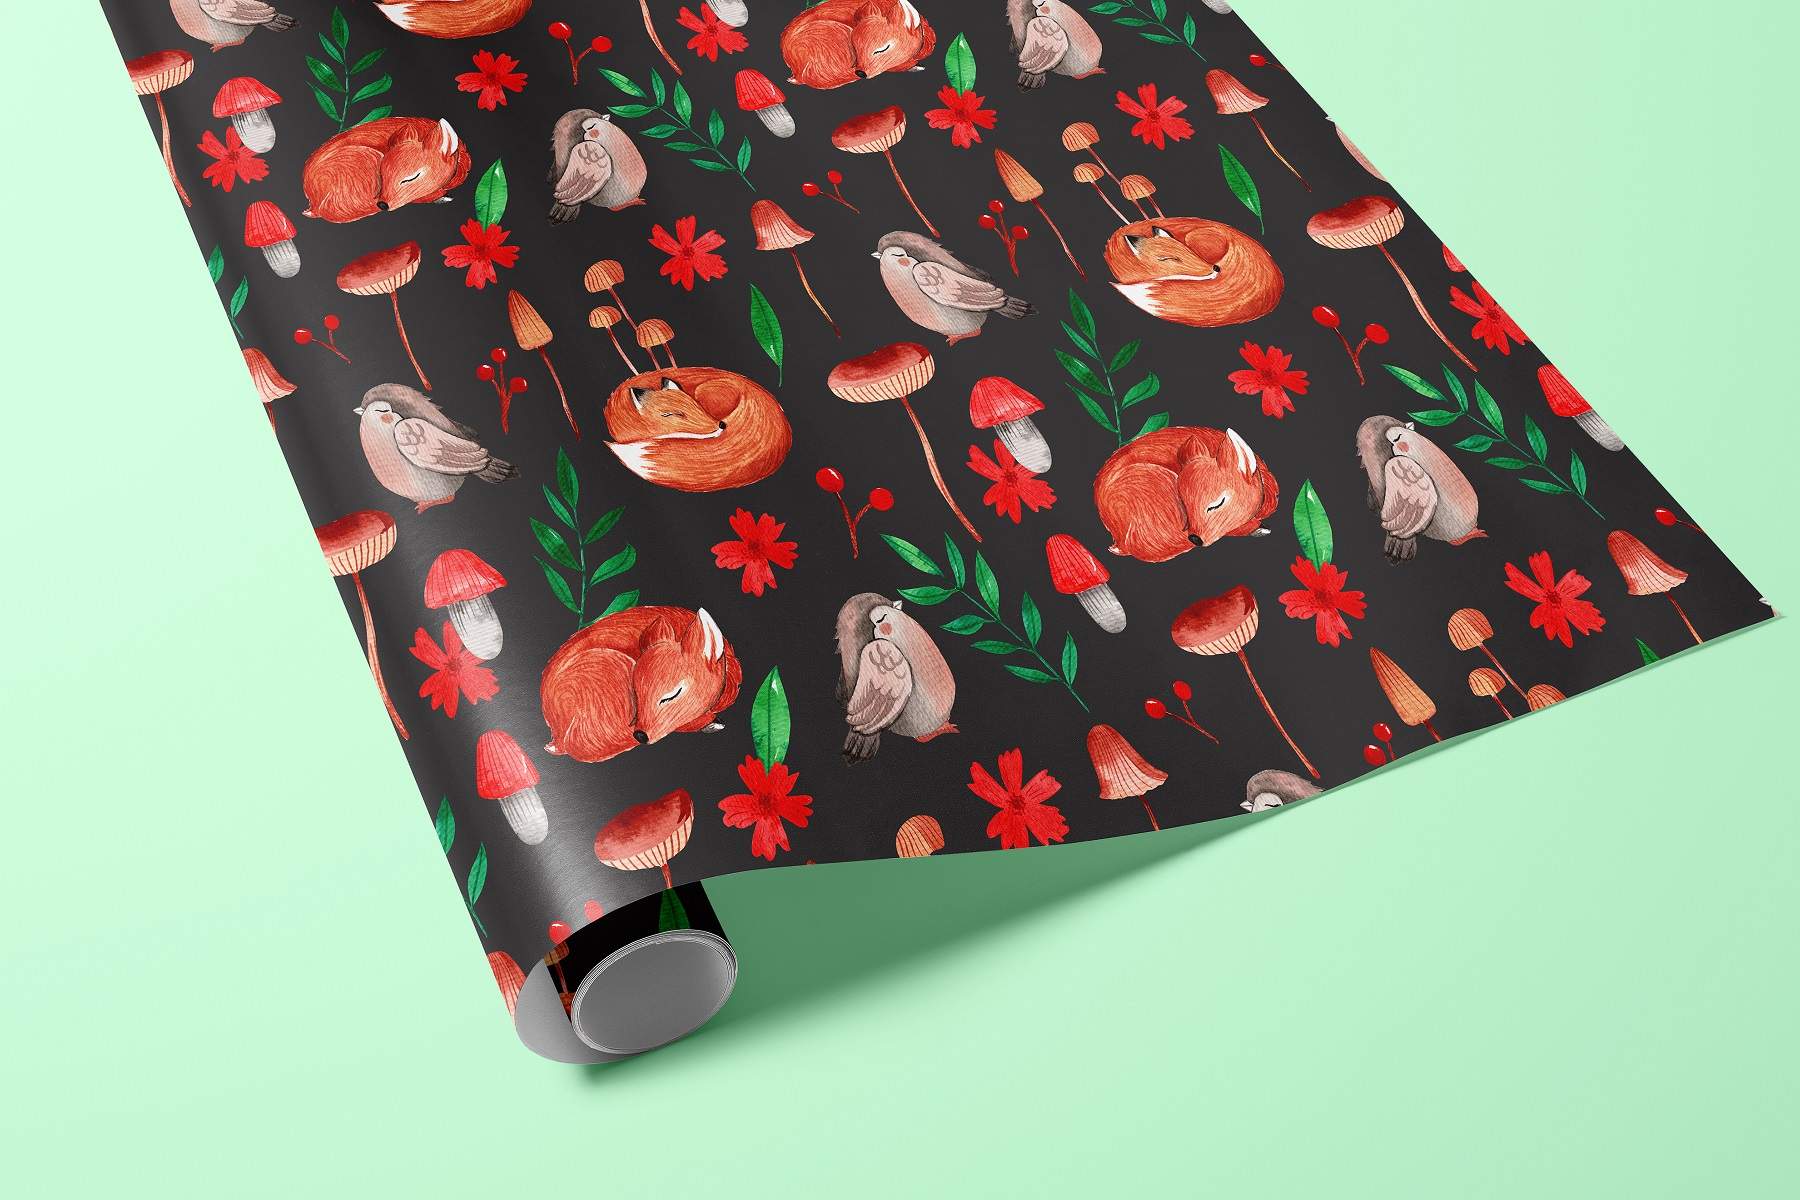 Black wrapping paper with foxes and flowers on it.